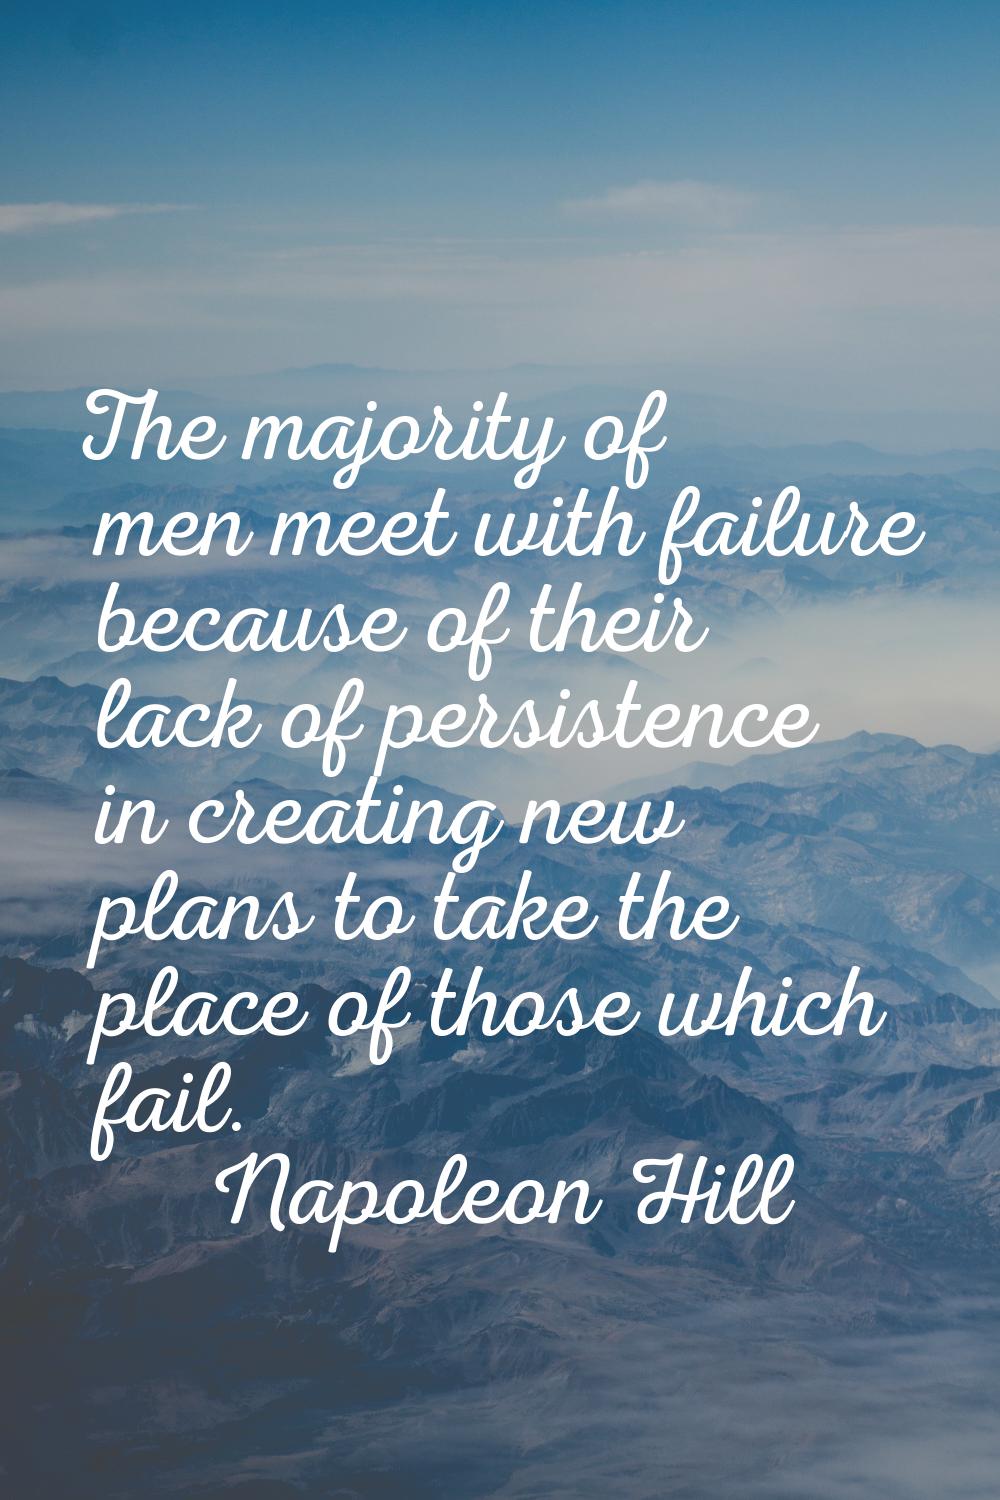 The majority of men meet with failure because of their lack of persistence in creating new plans to